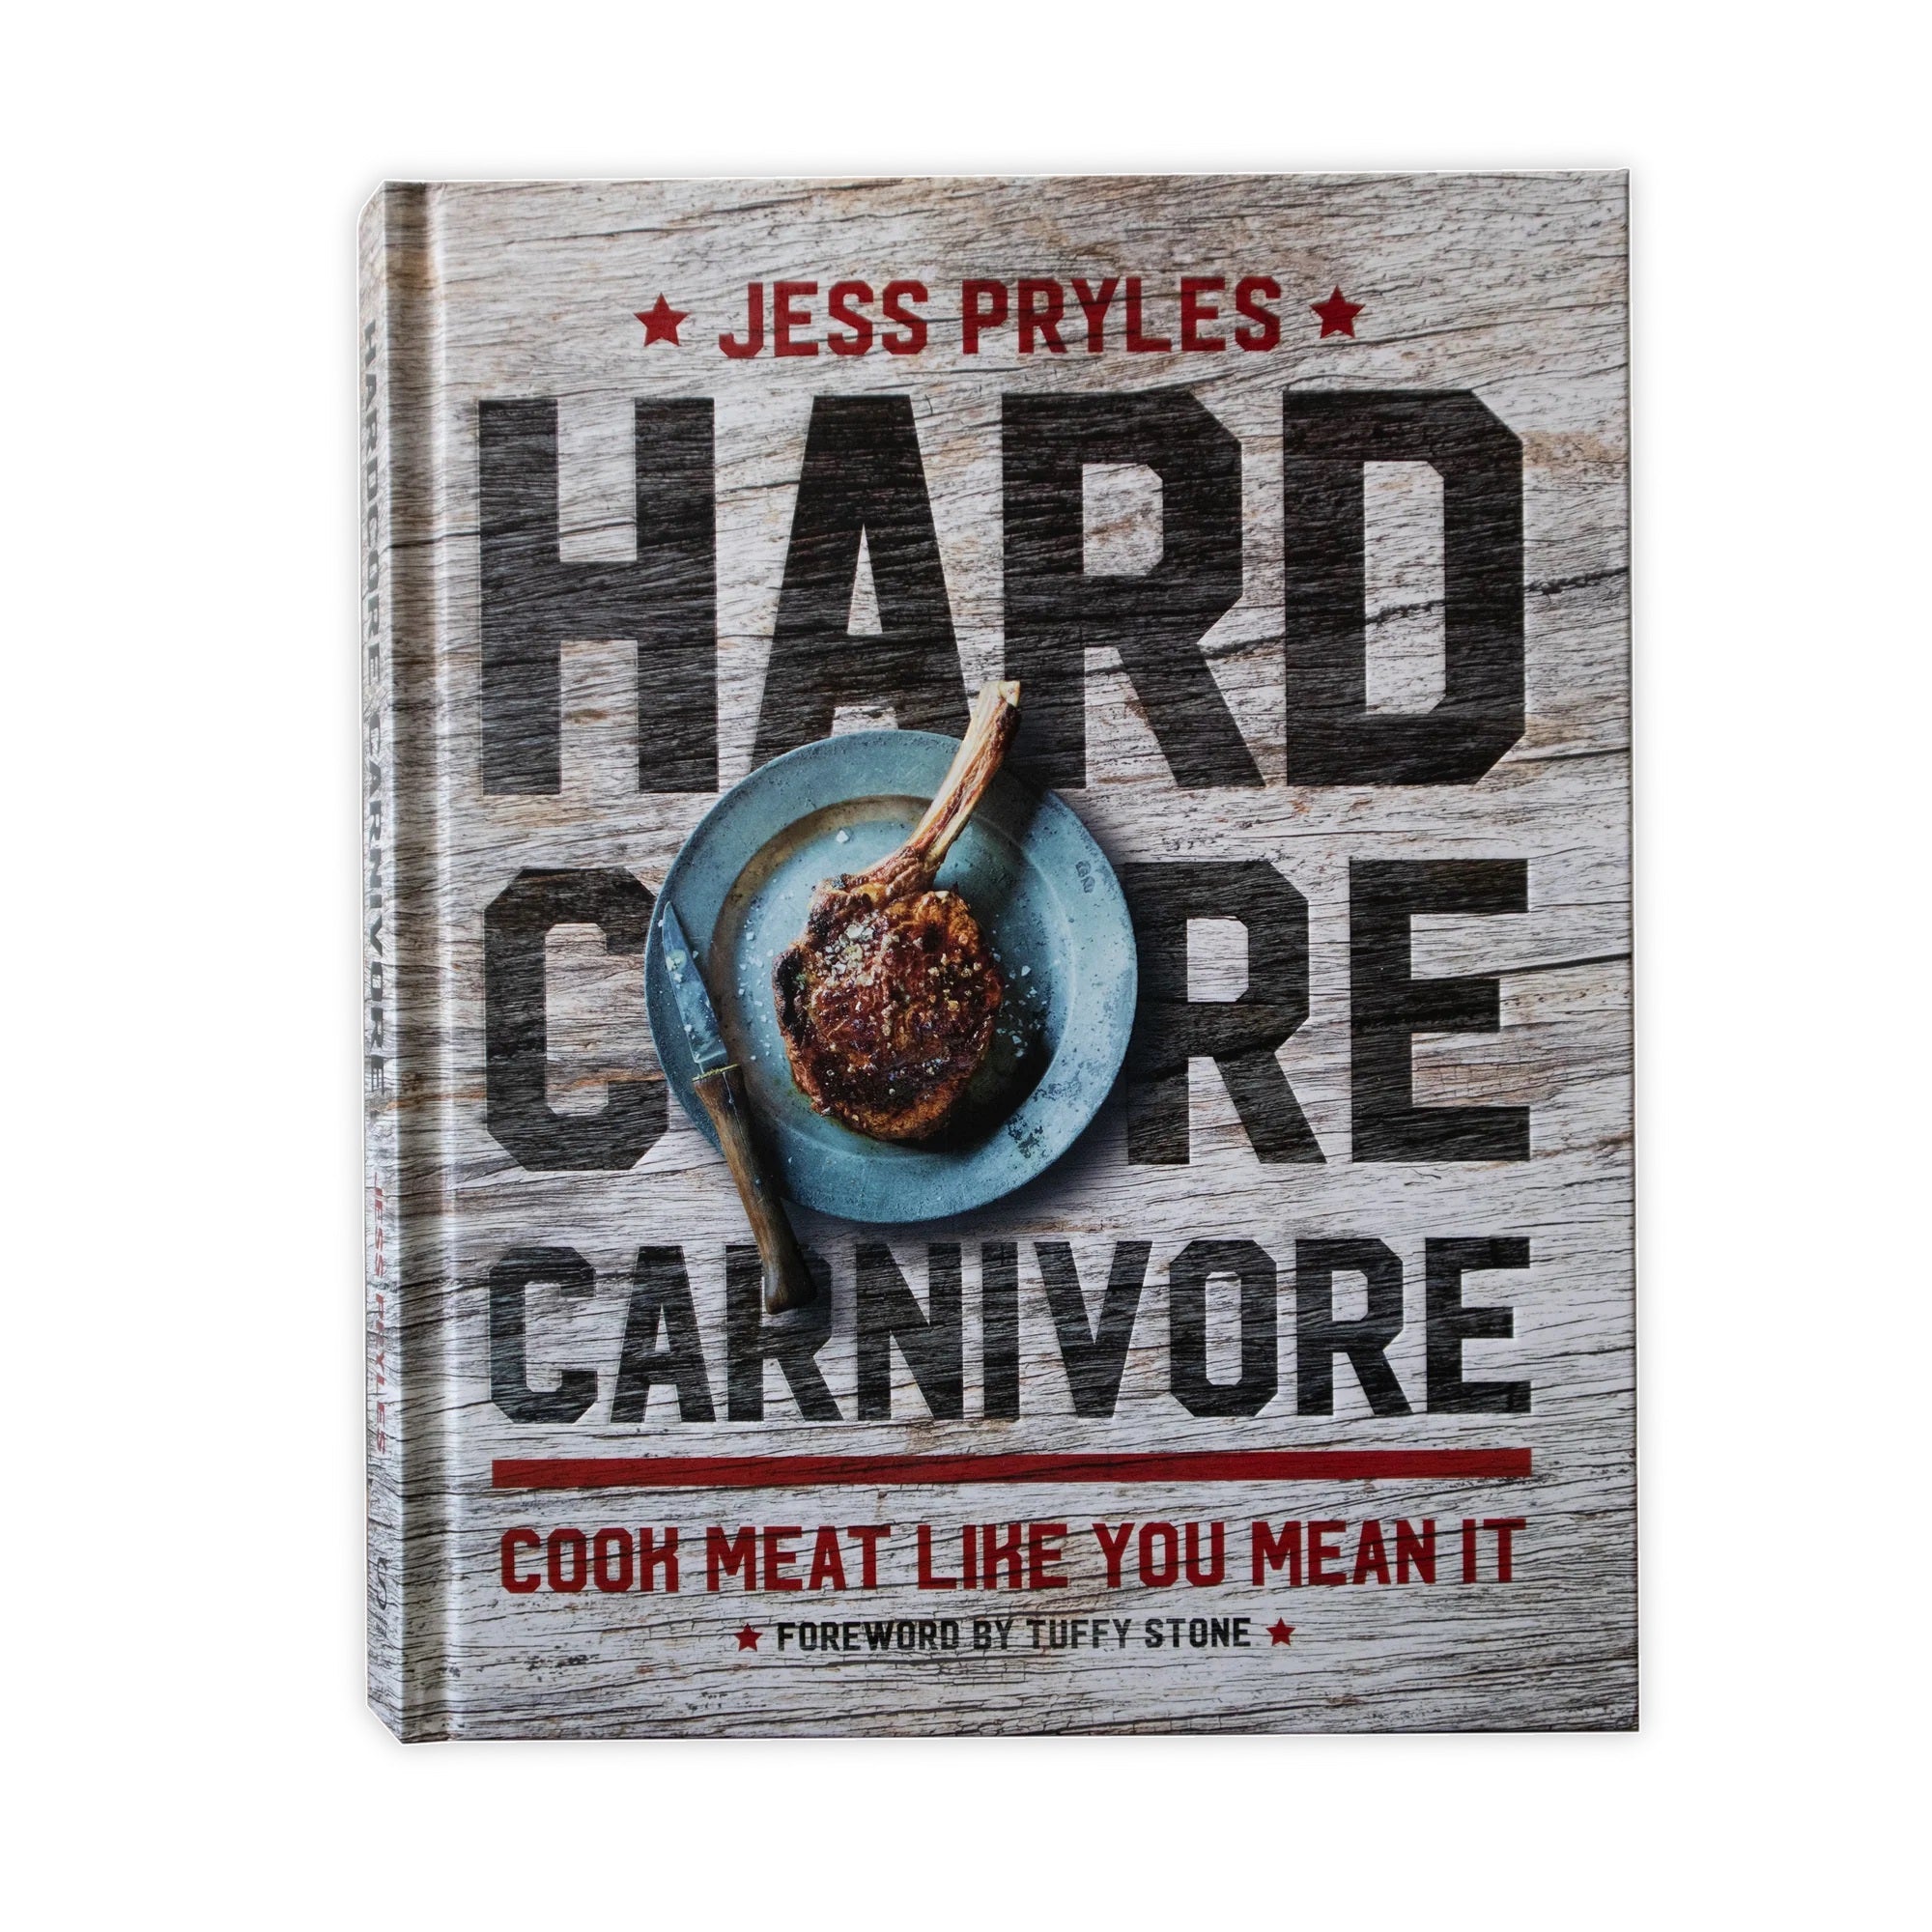 Harcore Carnivore by Jess Pryles